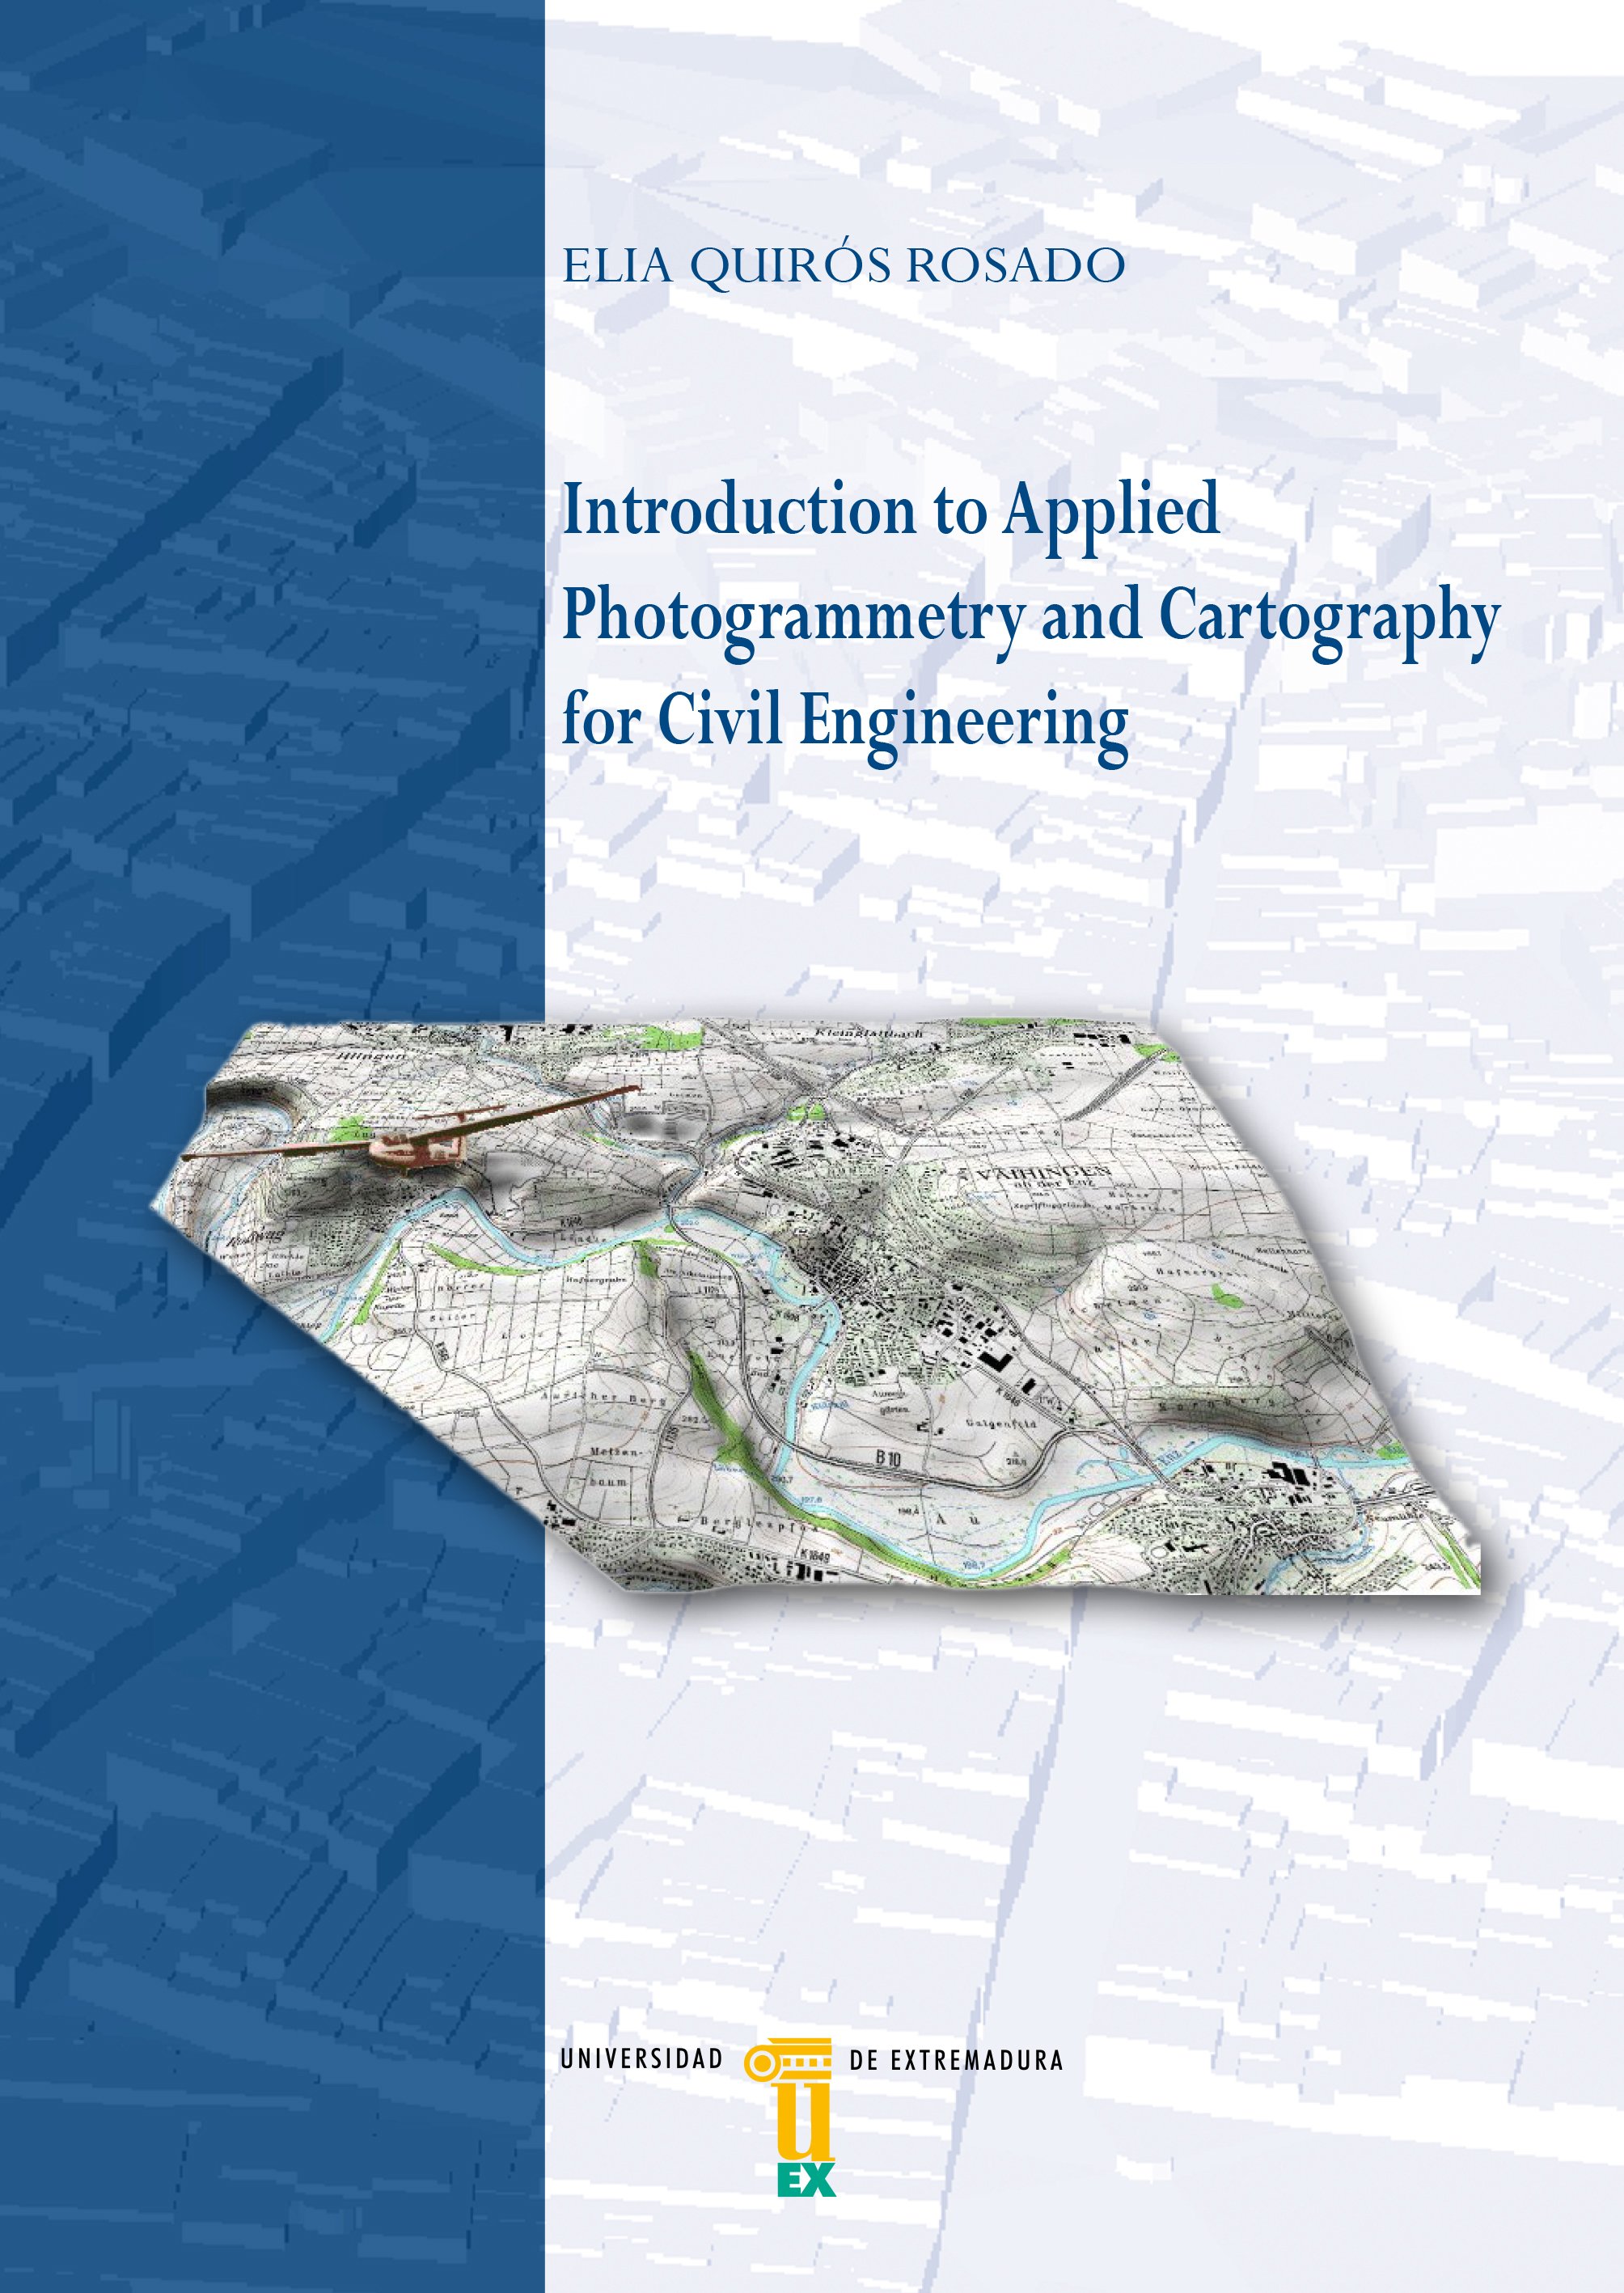 Imagen de portada del libro Introduction to applied photogrammetry and cartography for civil engineering